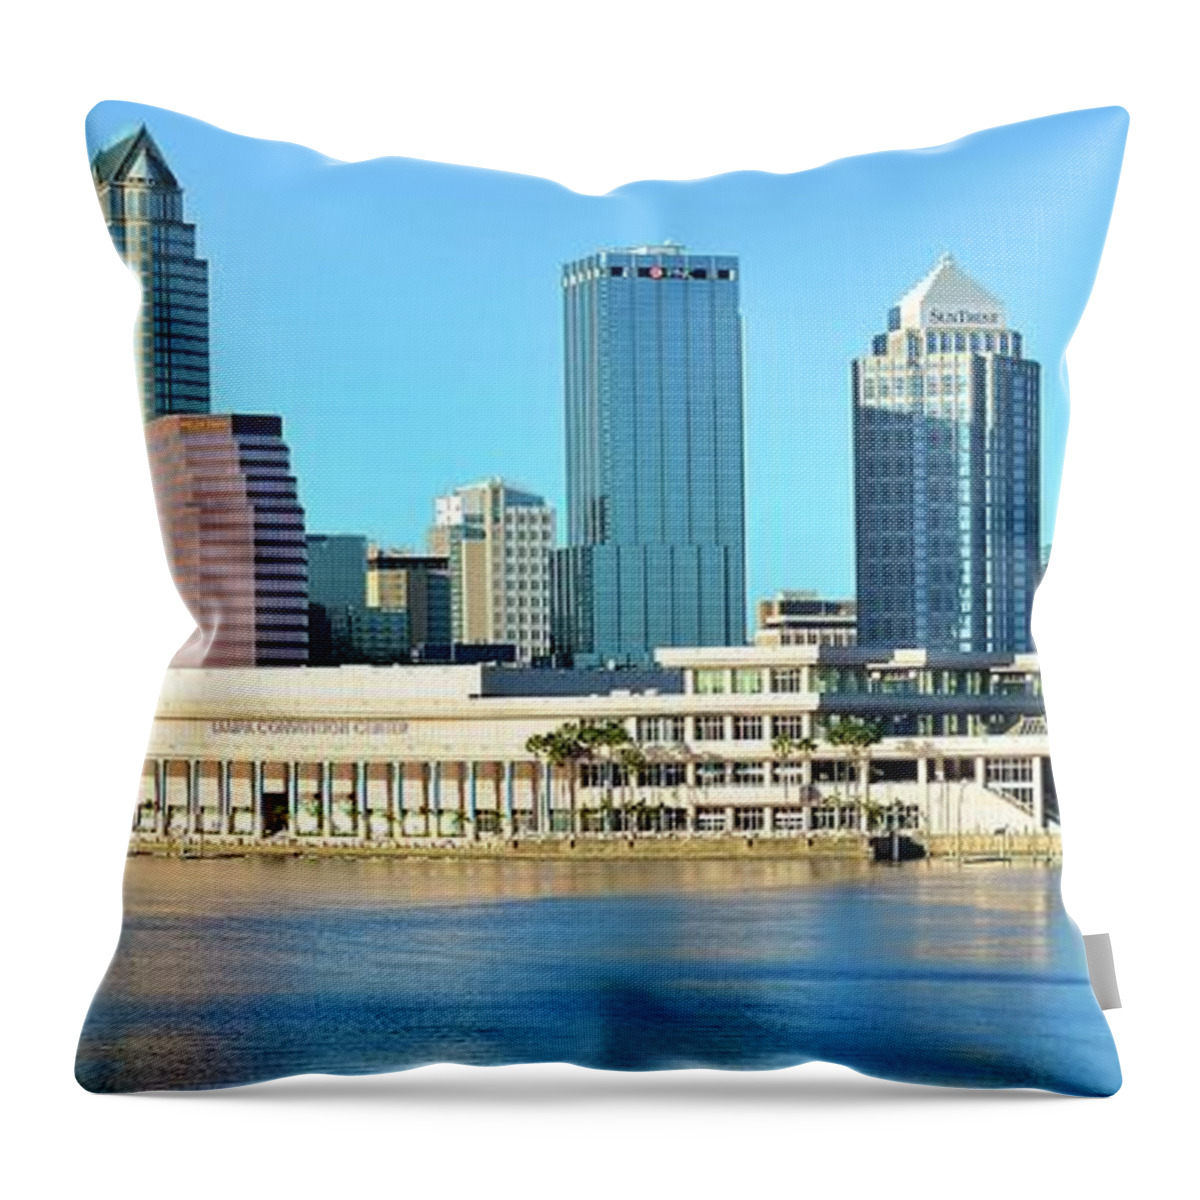 Tampa Throw Pillow featuring the photograph Towers by the Bay by Frozen in Time Fine Art Photography